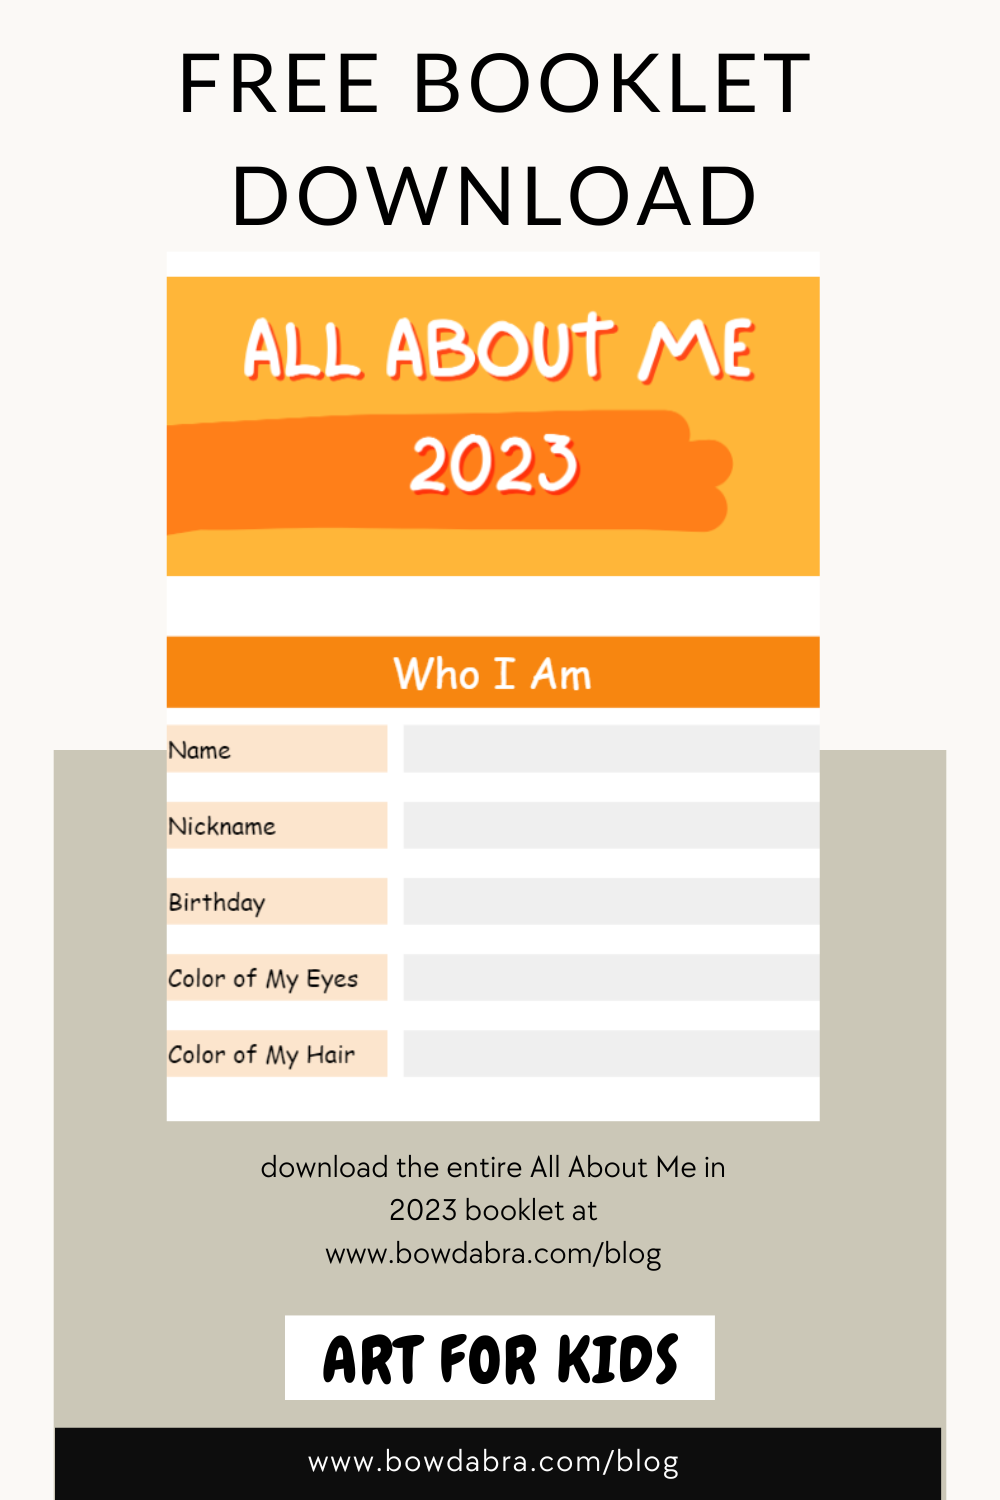 All About Me in 2023 (Pinterest)